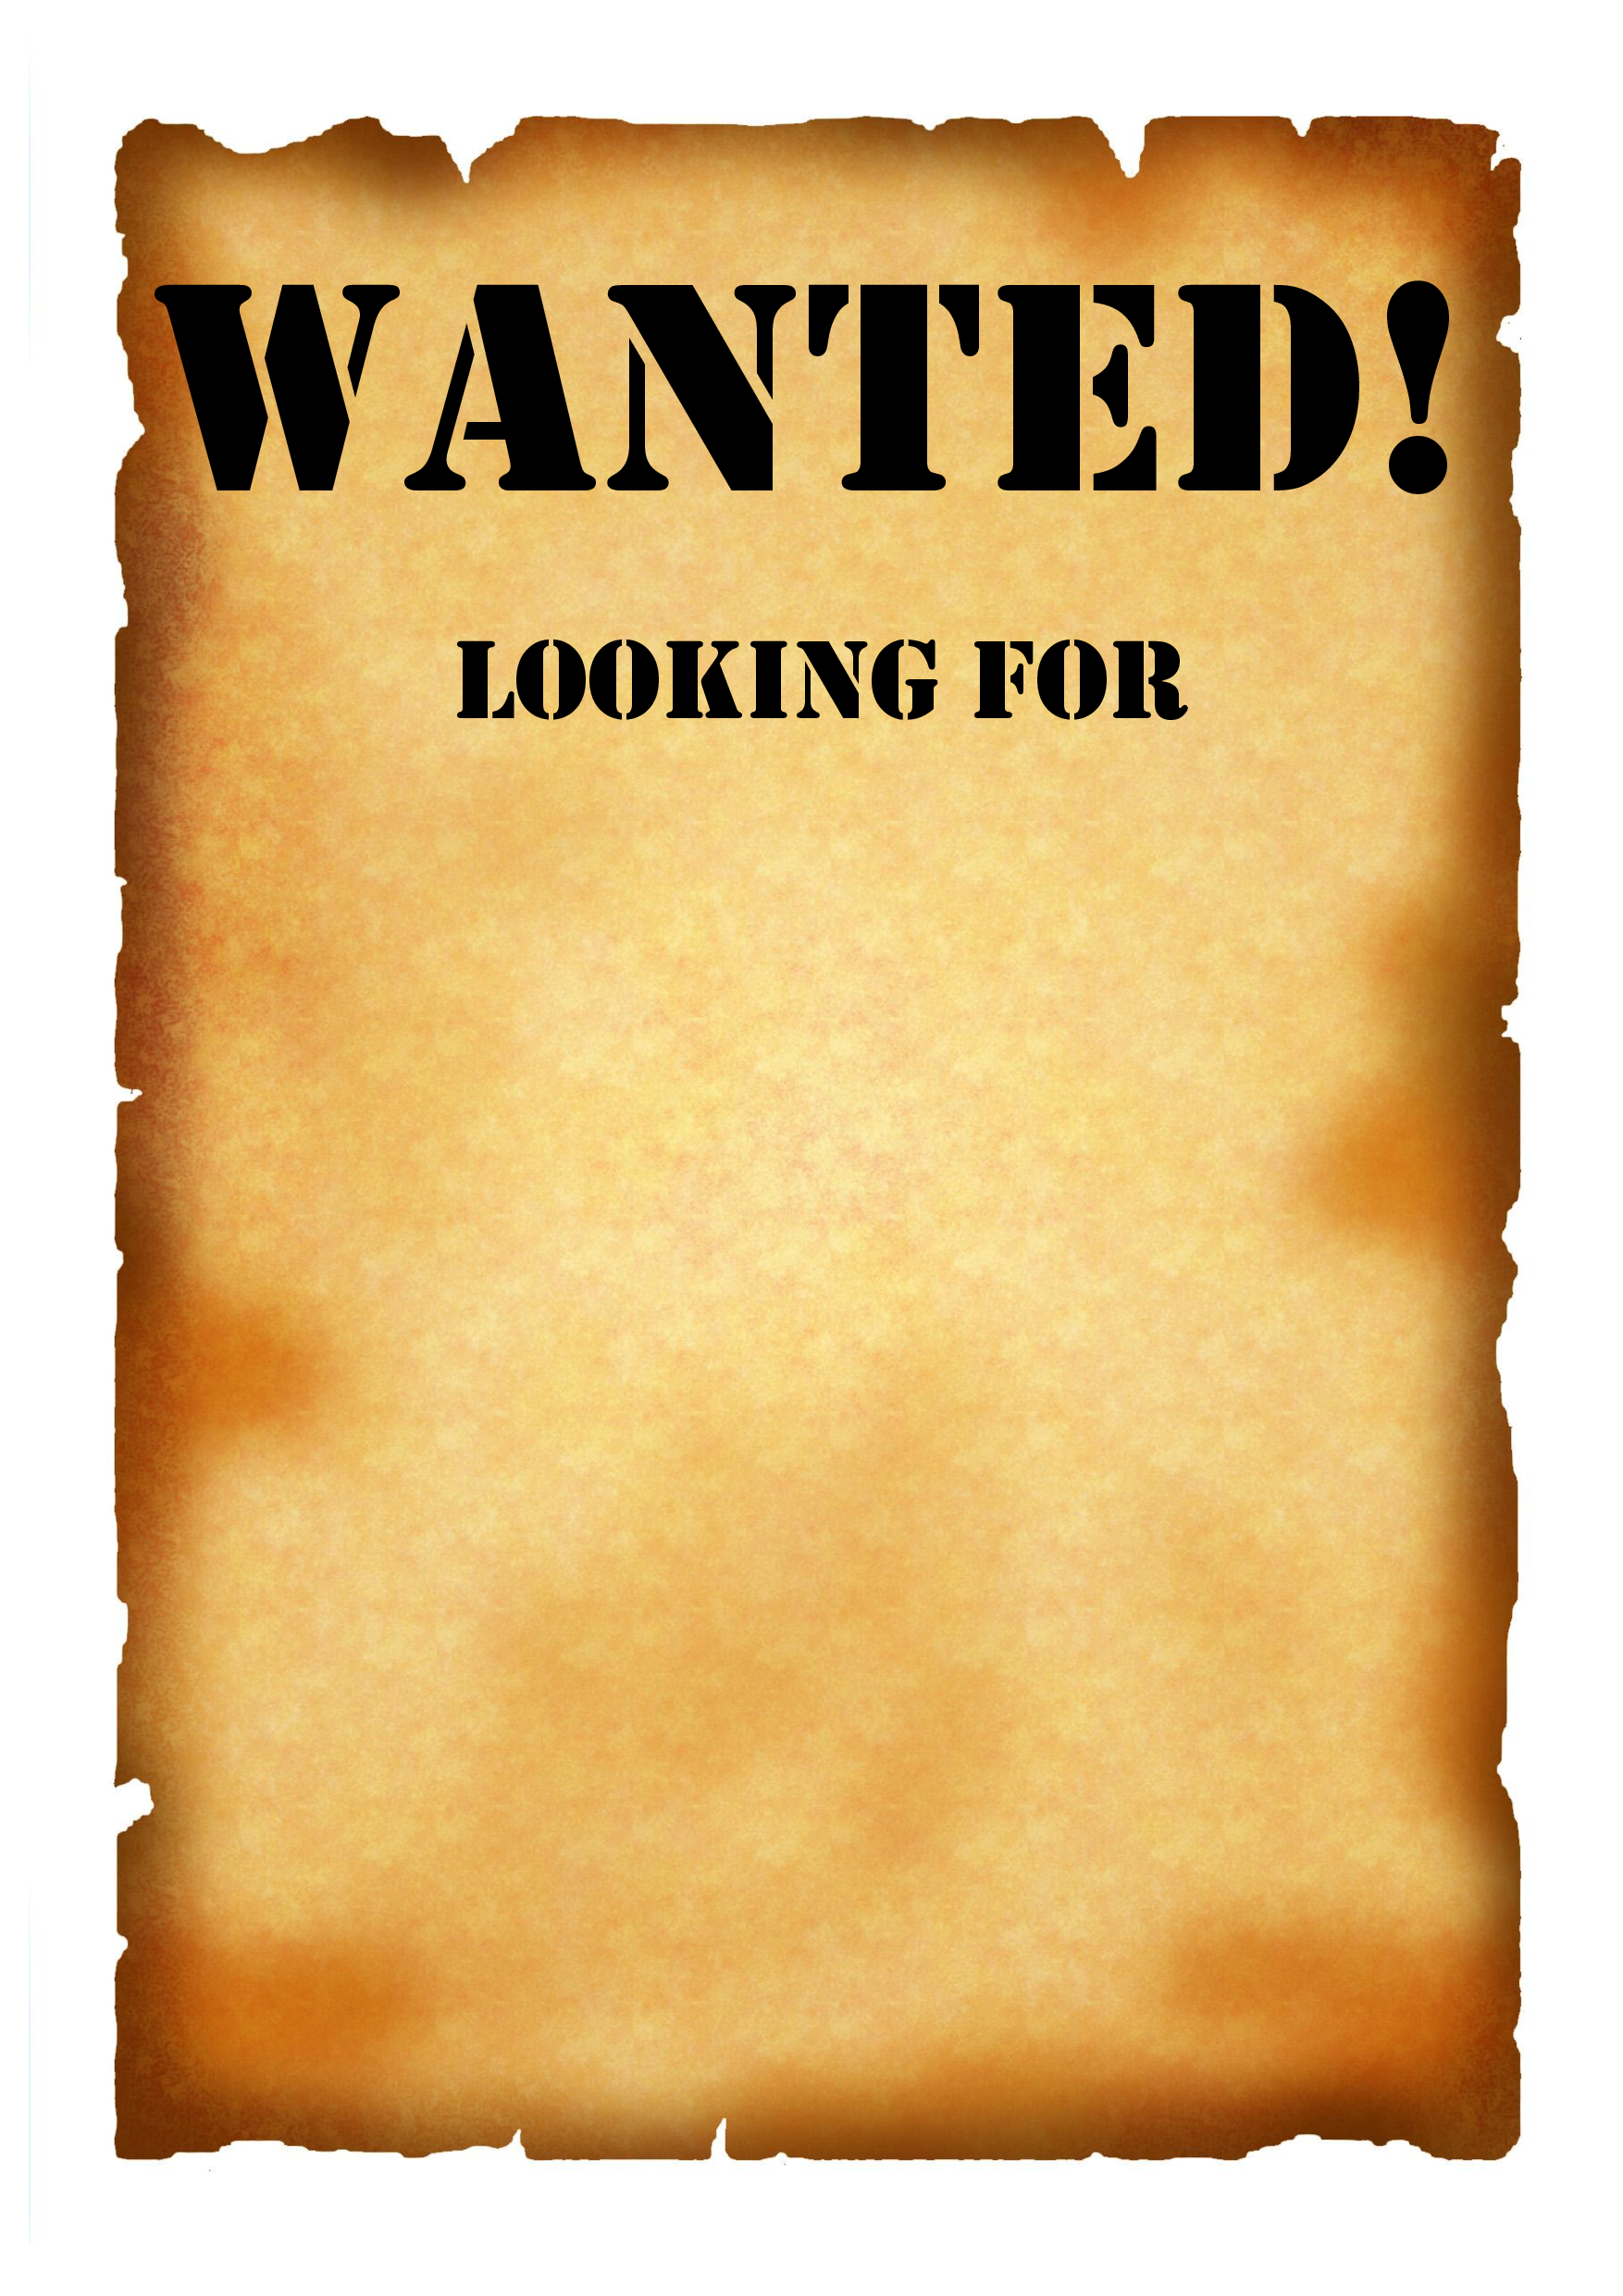 Wanted Poster Template 2 By Lizzy2008